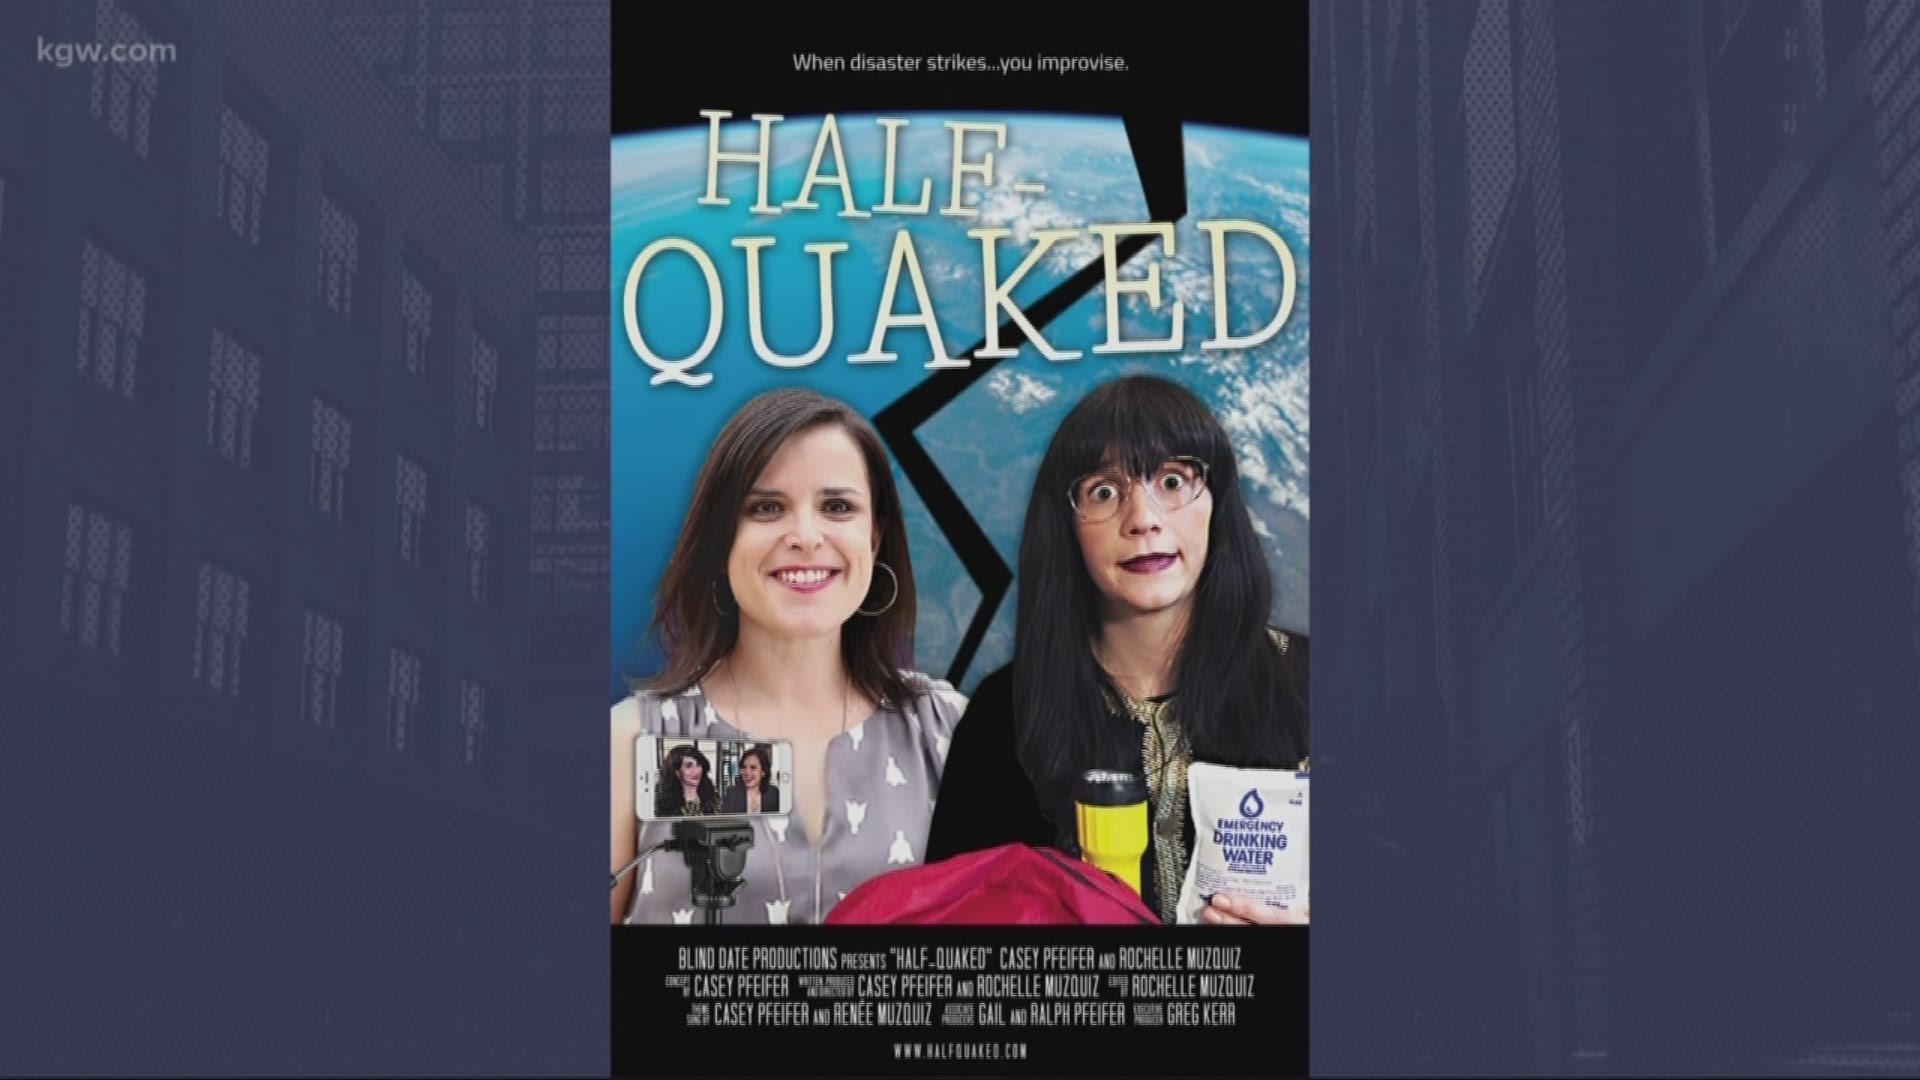 Half-Quaked takes a comedic look at earthquake preparation. You can see it on Friday night at the Clinton Street Theater during the Oregon Independent Film Festival.
#TonightwithCassidy